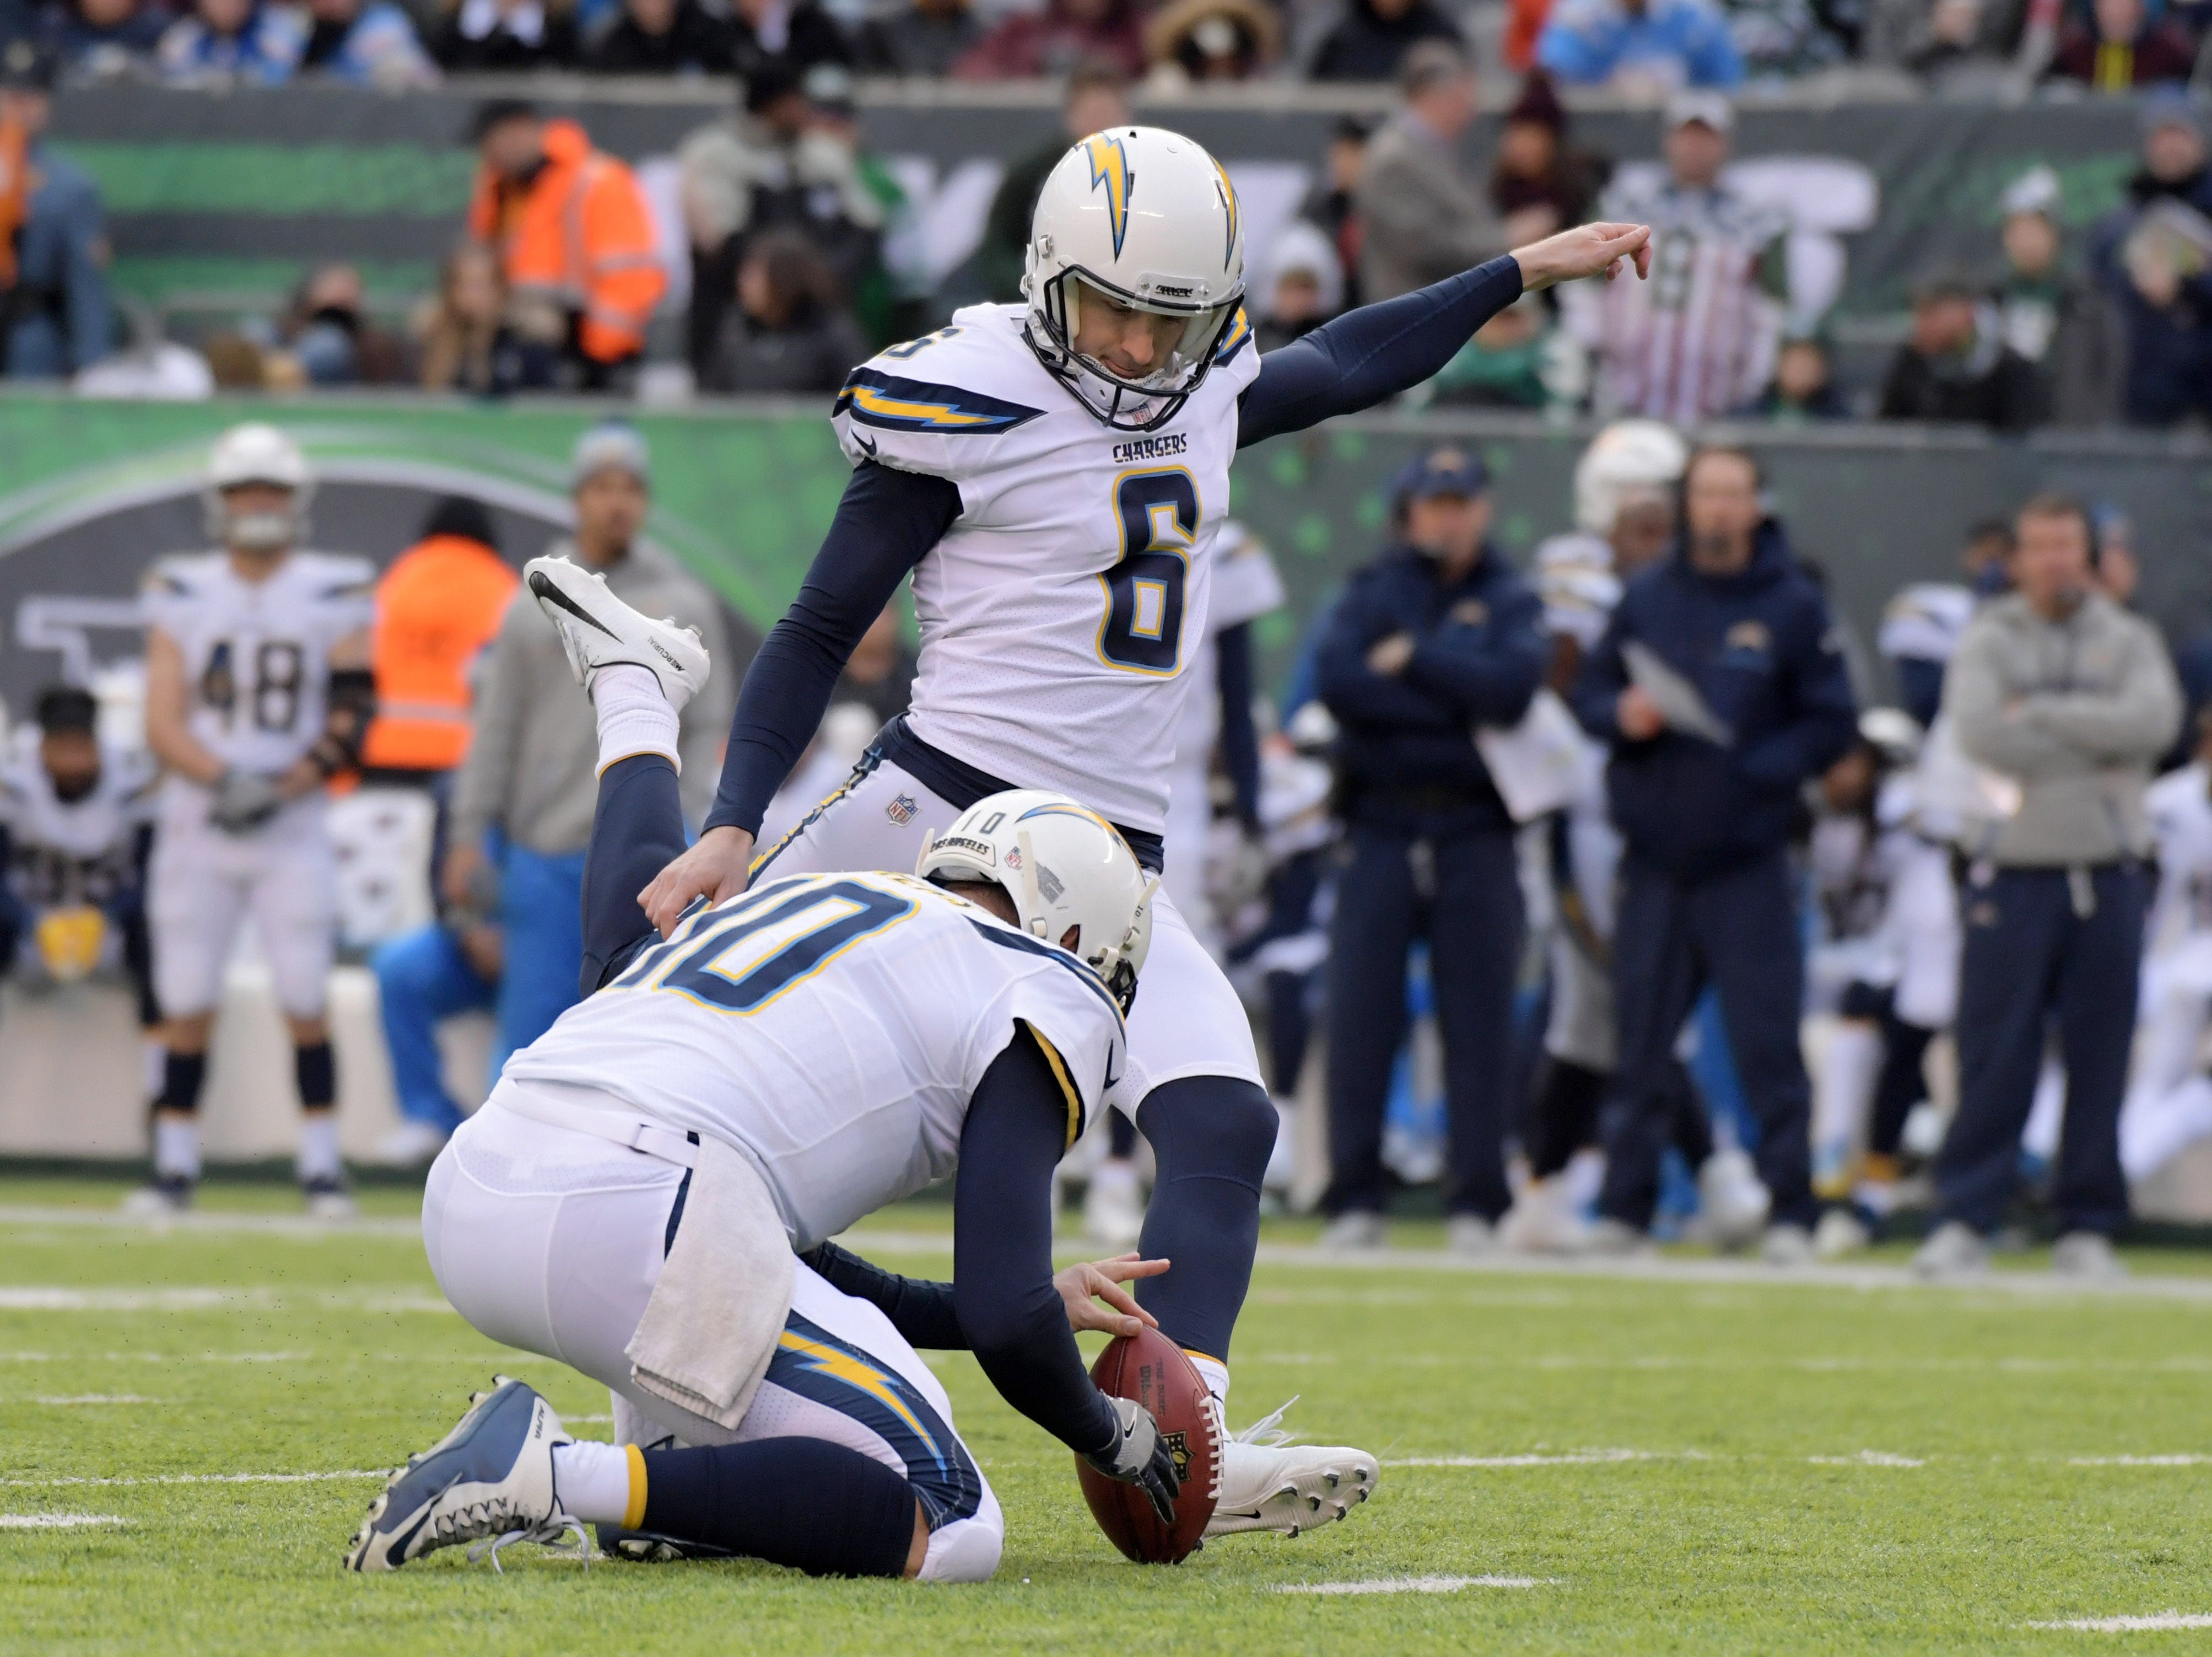 Report: Chargers adding a second kicker to their roster